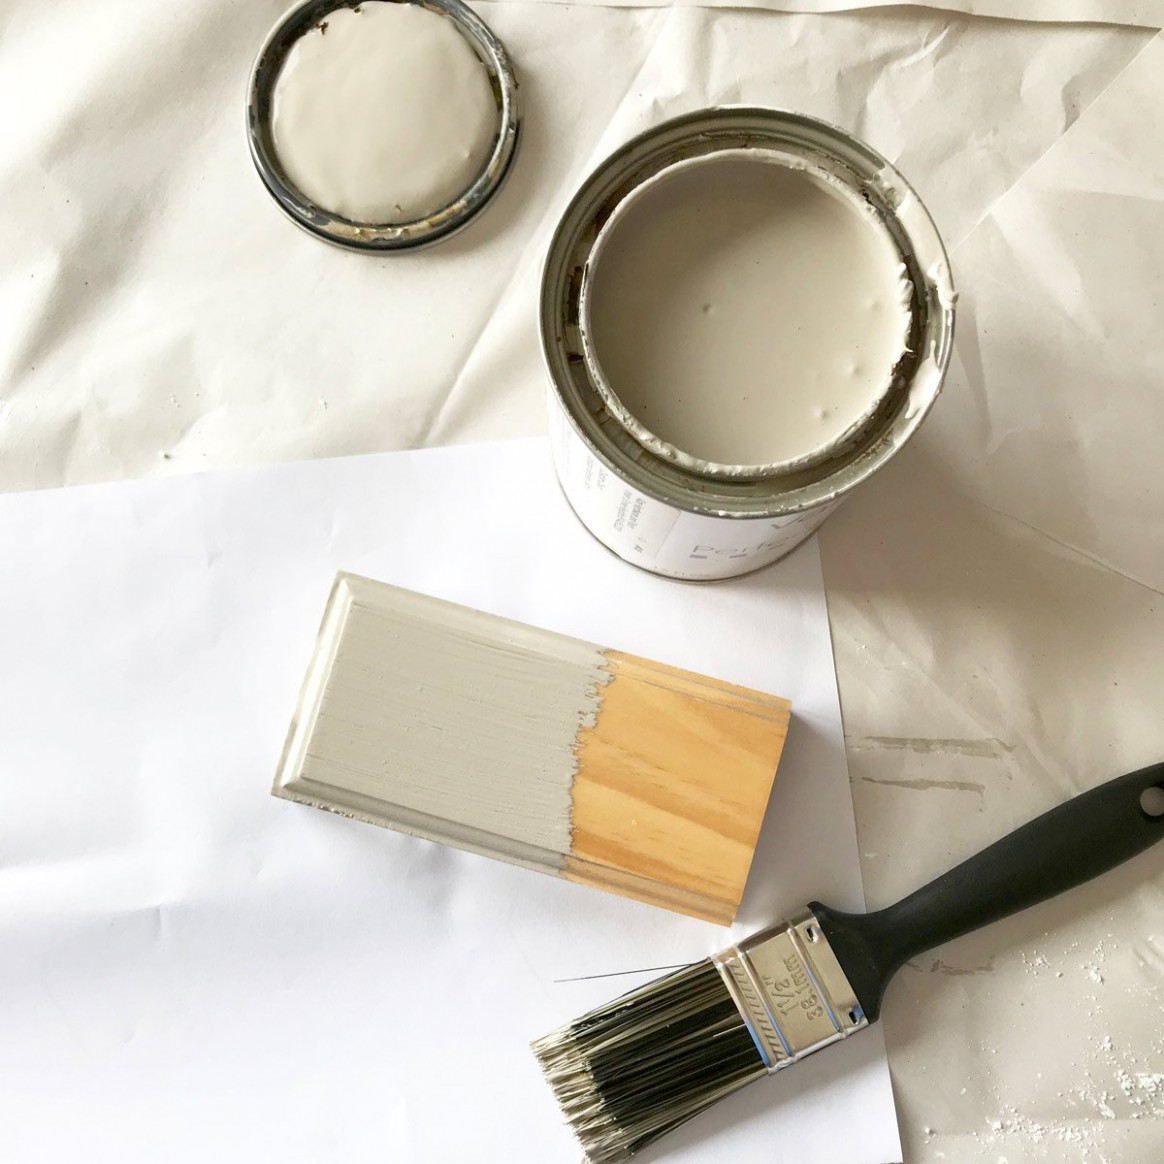 Diy Chalk Paint: How To Make Colored Chalk Paint Can You Put Latex Paint Over Chalk Paint